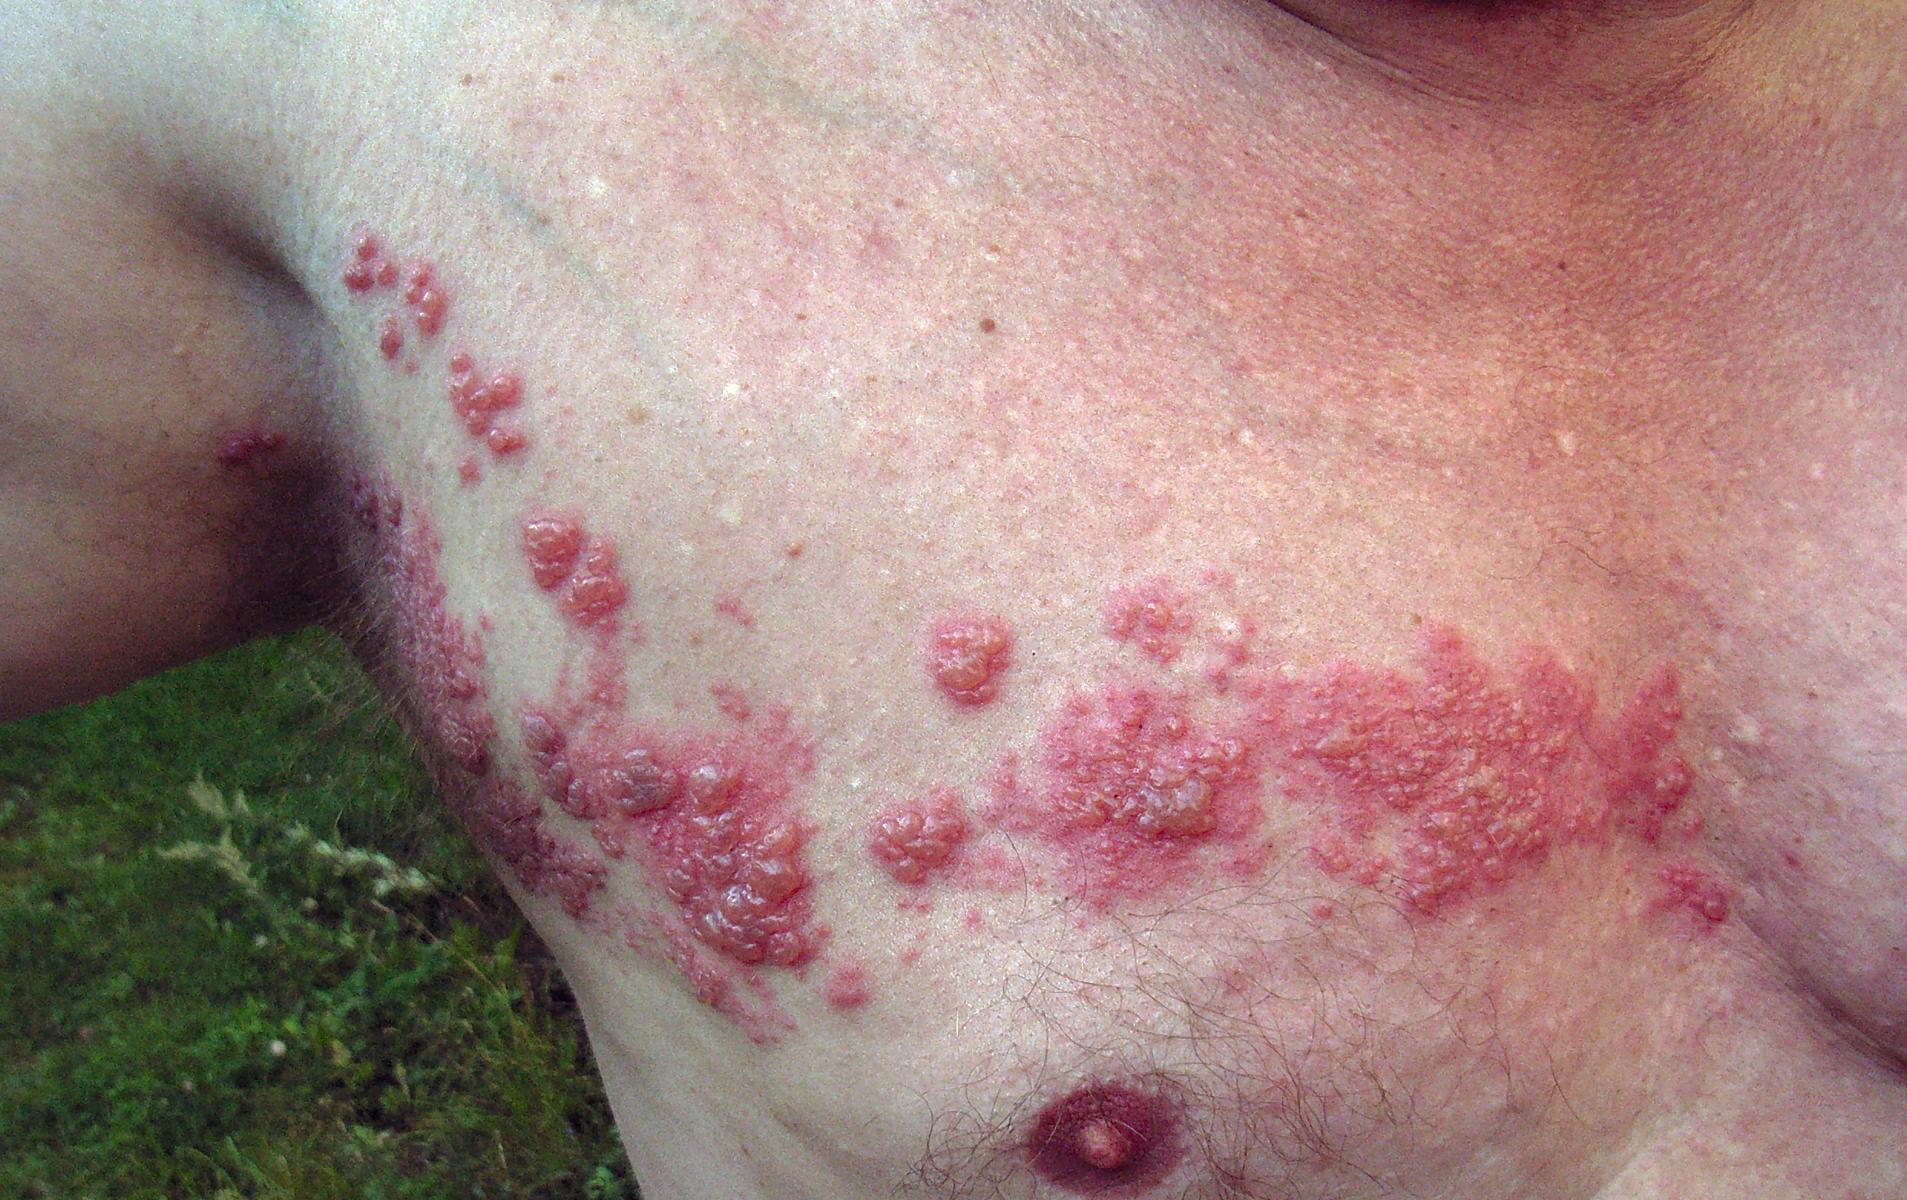 File:Herpes zoster chest.jpg